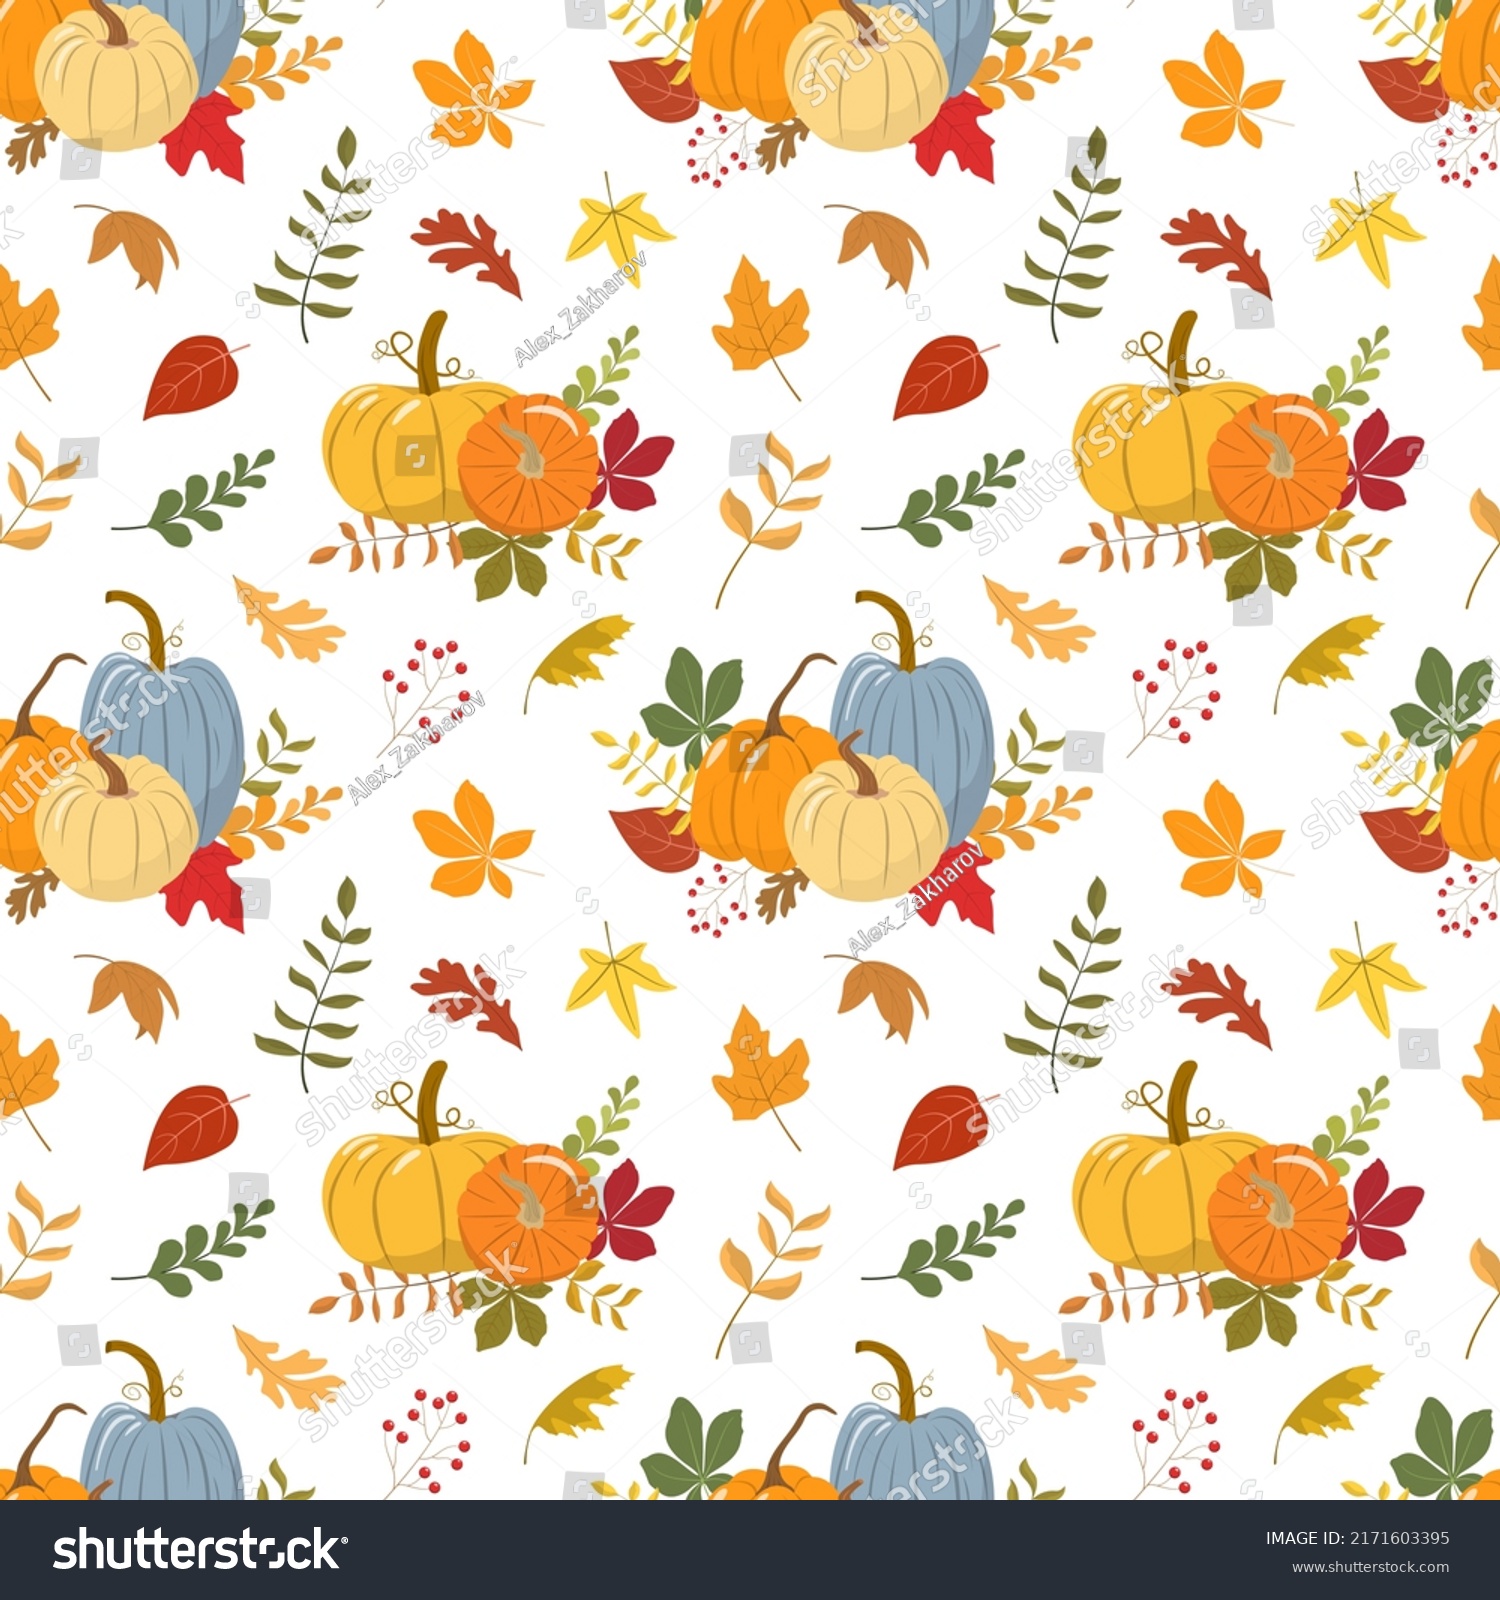 Autumn harvest festival vector seamless pattern with orange and yellow pumpkins, and color forest leaves. Isolated on white background. Autumn harvest illustration. Thanksgiving wallpaper. #2171603395